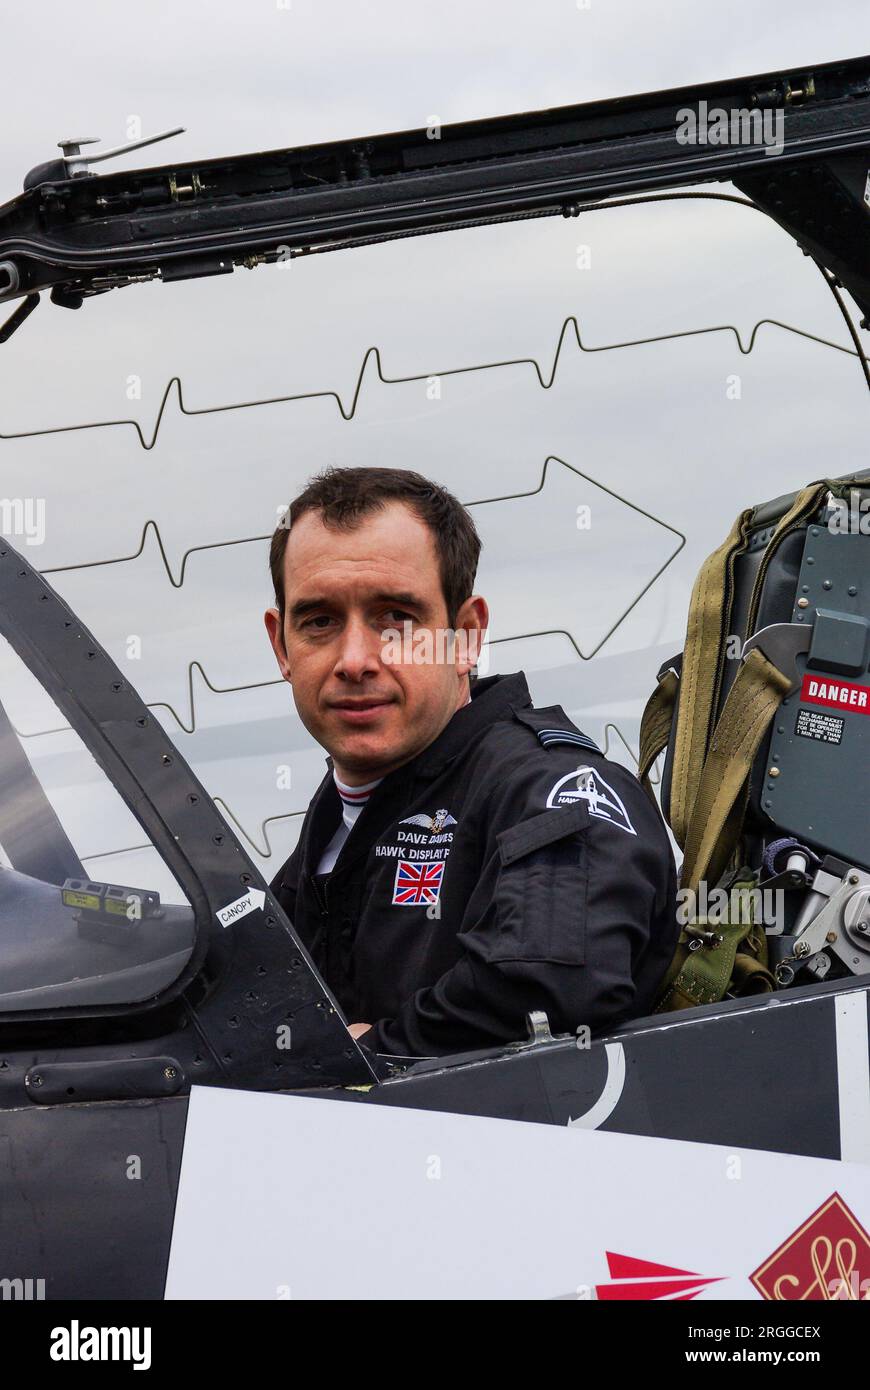 Pilot Dave Davies, Royal Air Force BAe Hawk solo display pilot in cockpit of jet plane. Canopy explosive cord for emergency ejection seat Stock Photo